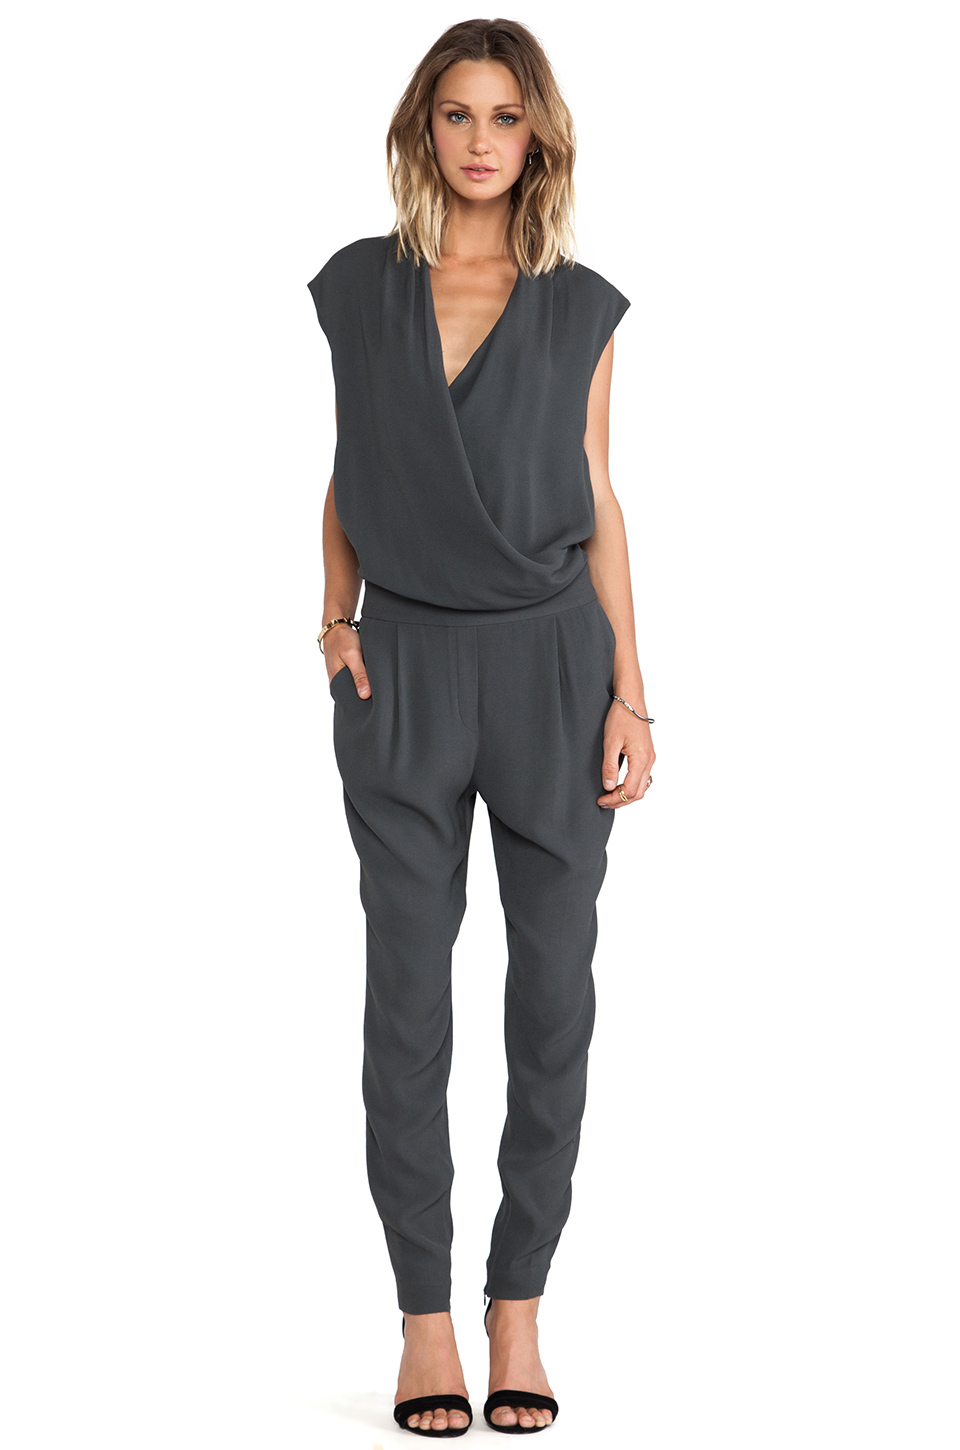 Lyst - By Malene Birger Cointa Fresh Look Jumpsuit in Gray